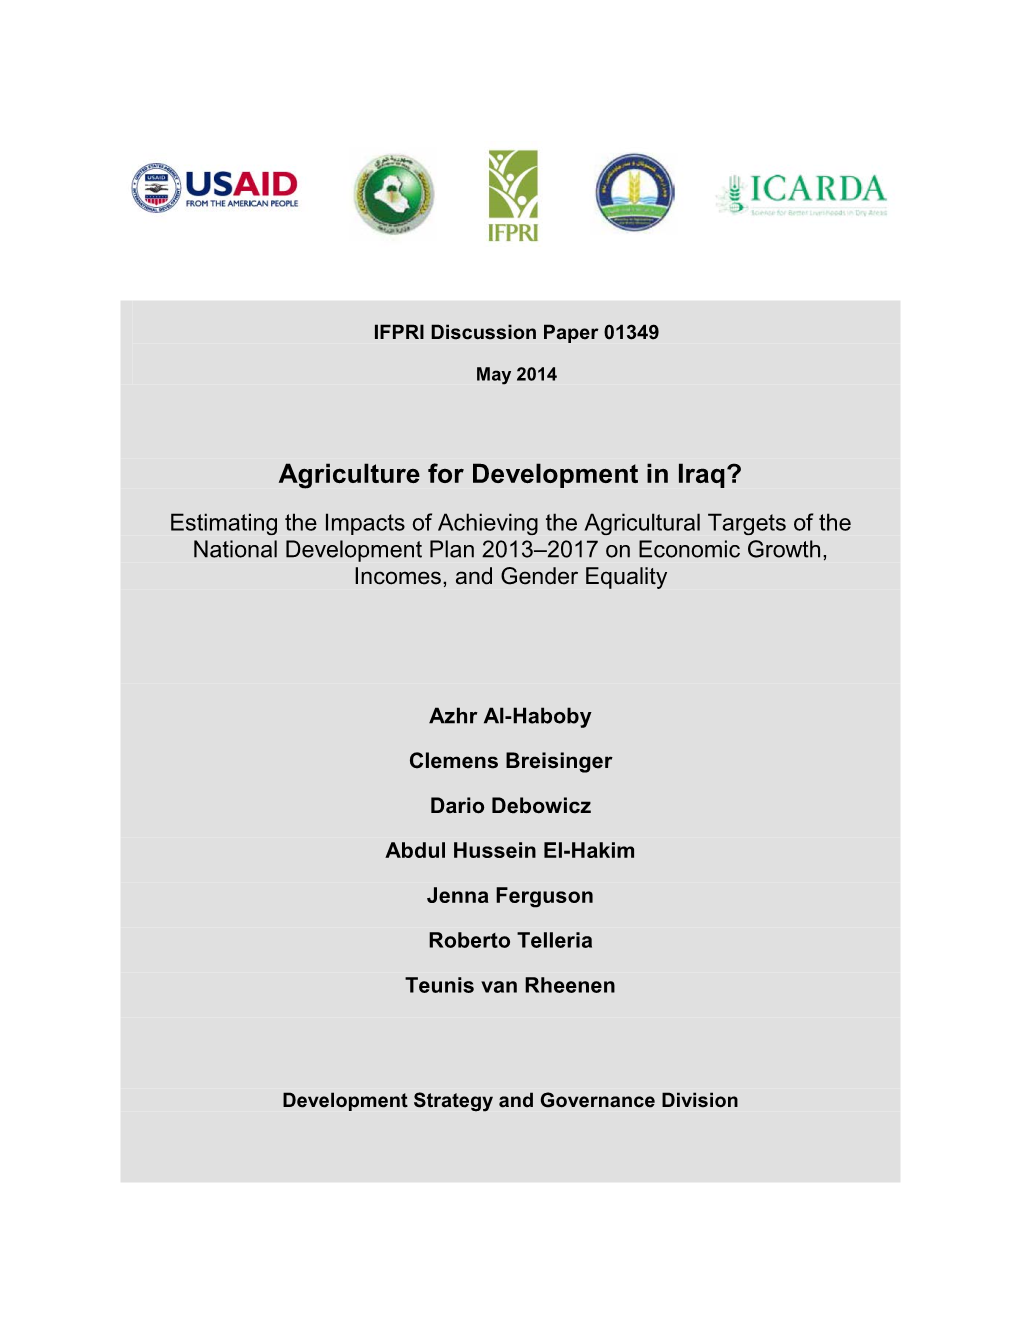 Agriculture for Development in Iraq?